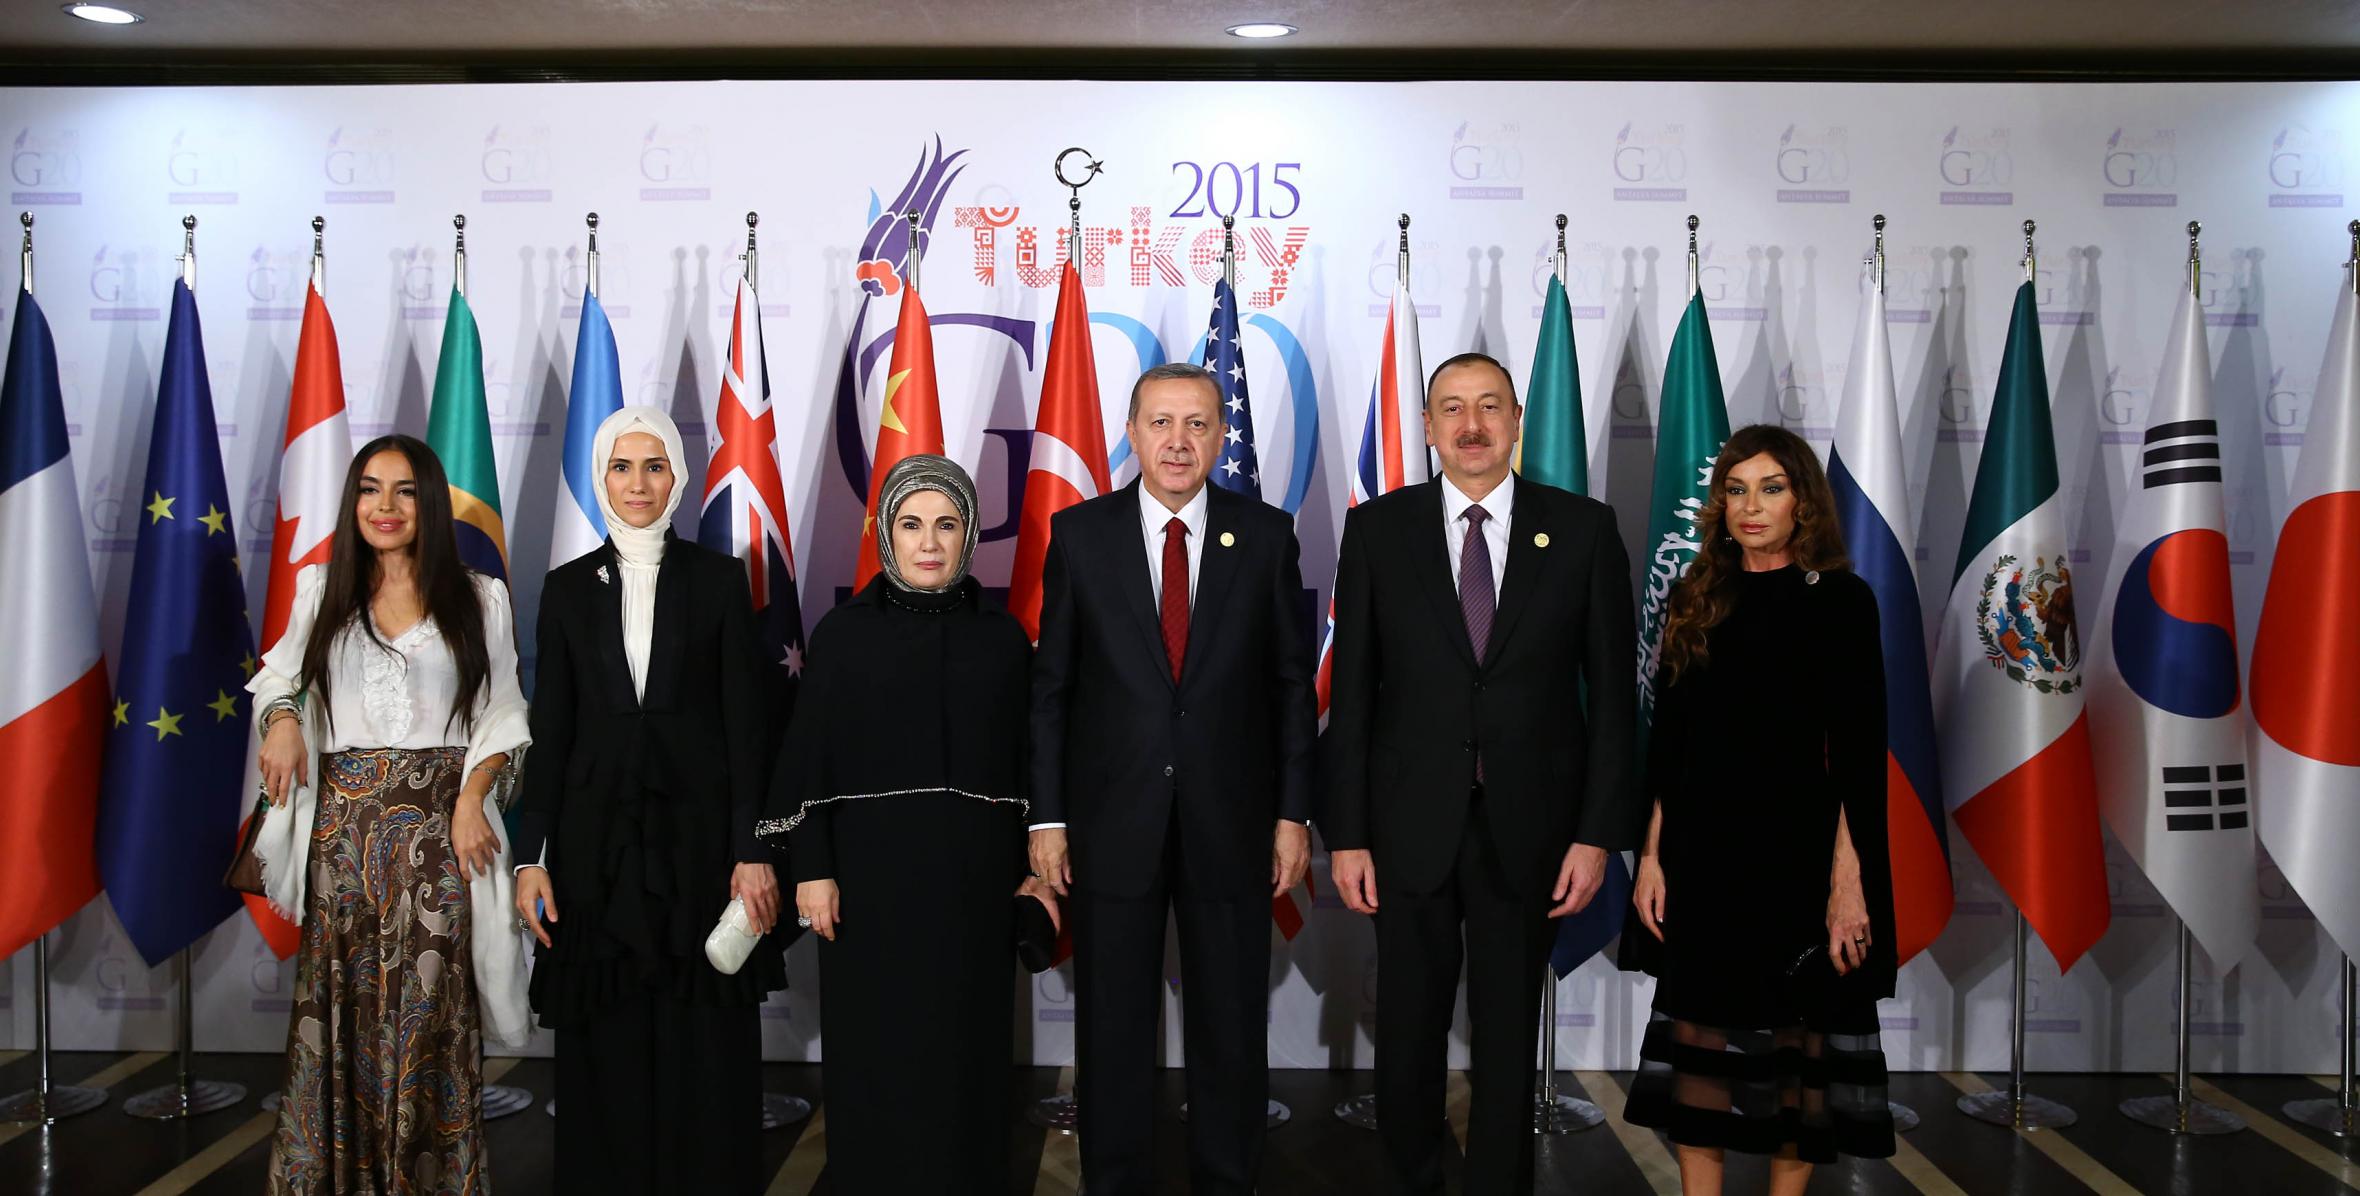 Dinner reception hosted on behalf of President of Turkey Recep Tayyip Erdogan in honor of participants of G20 Summit